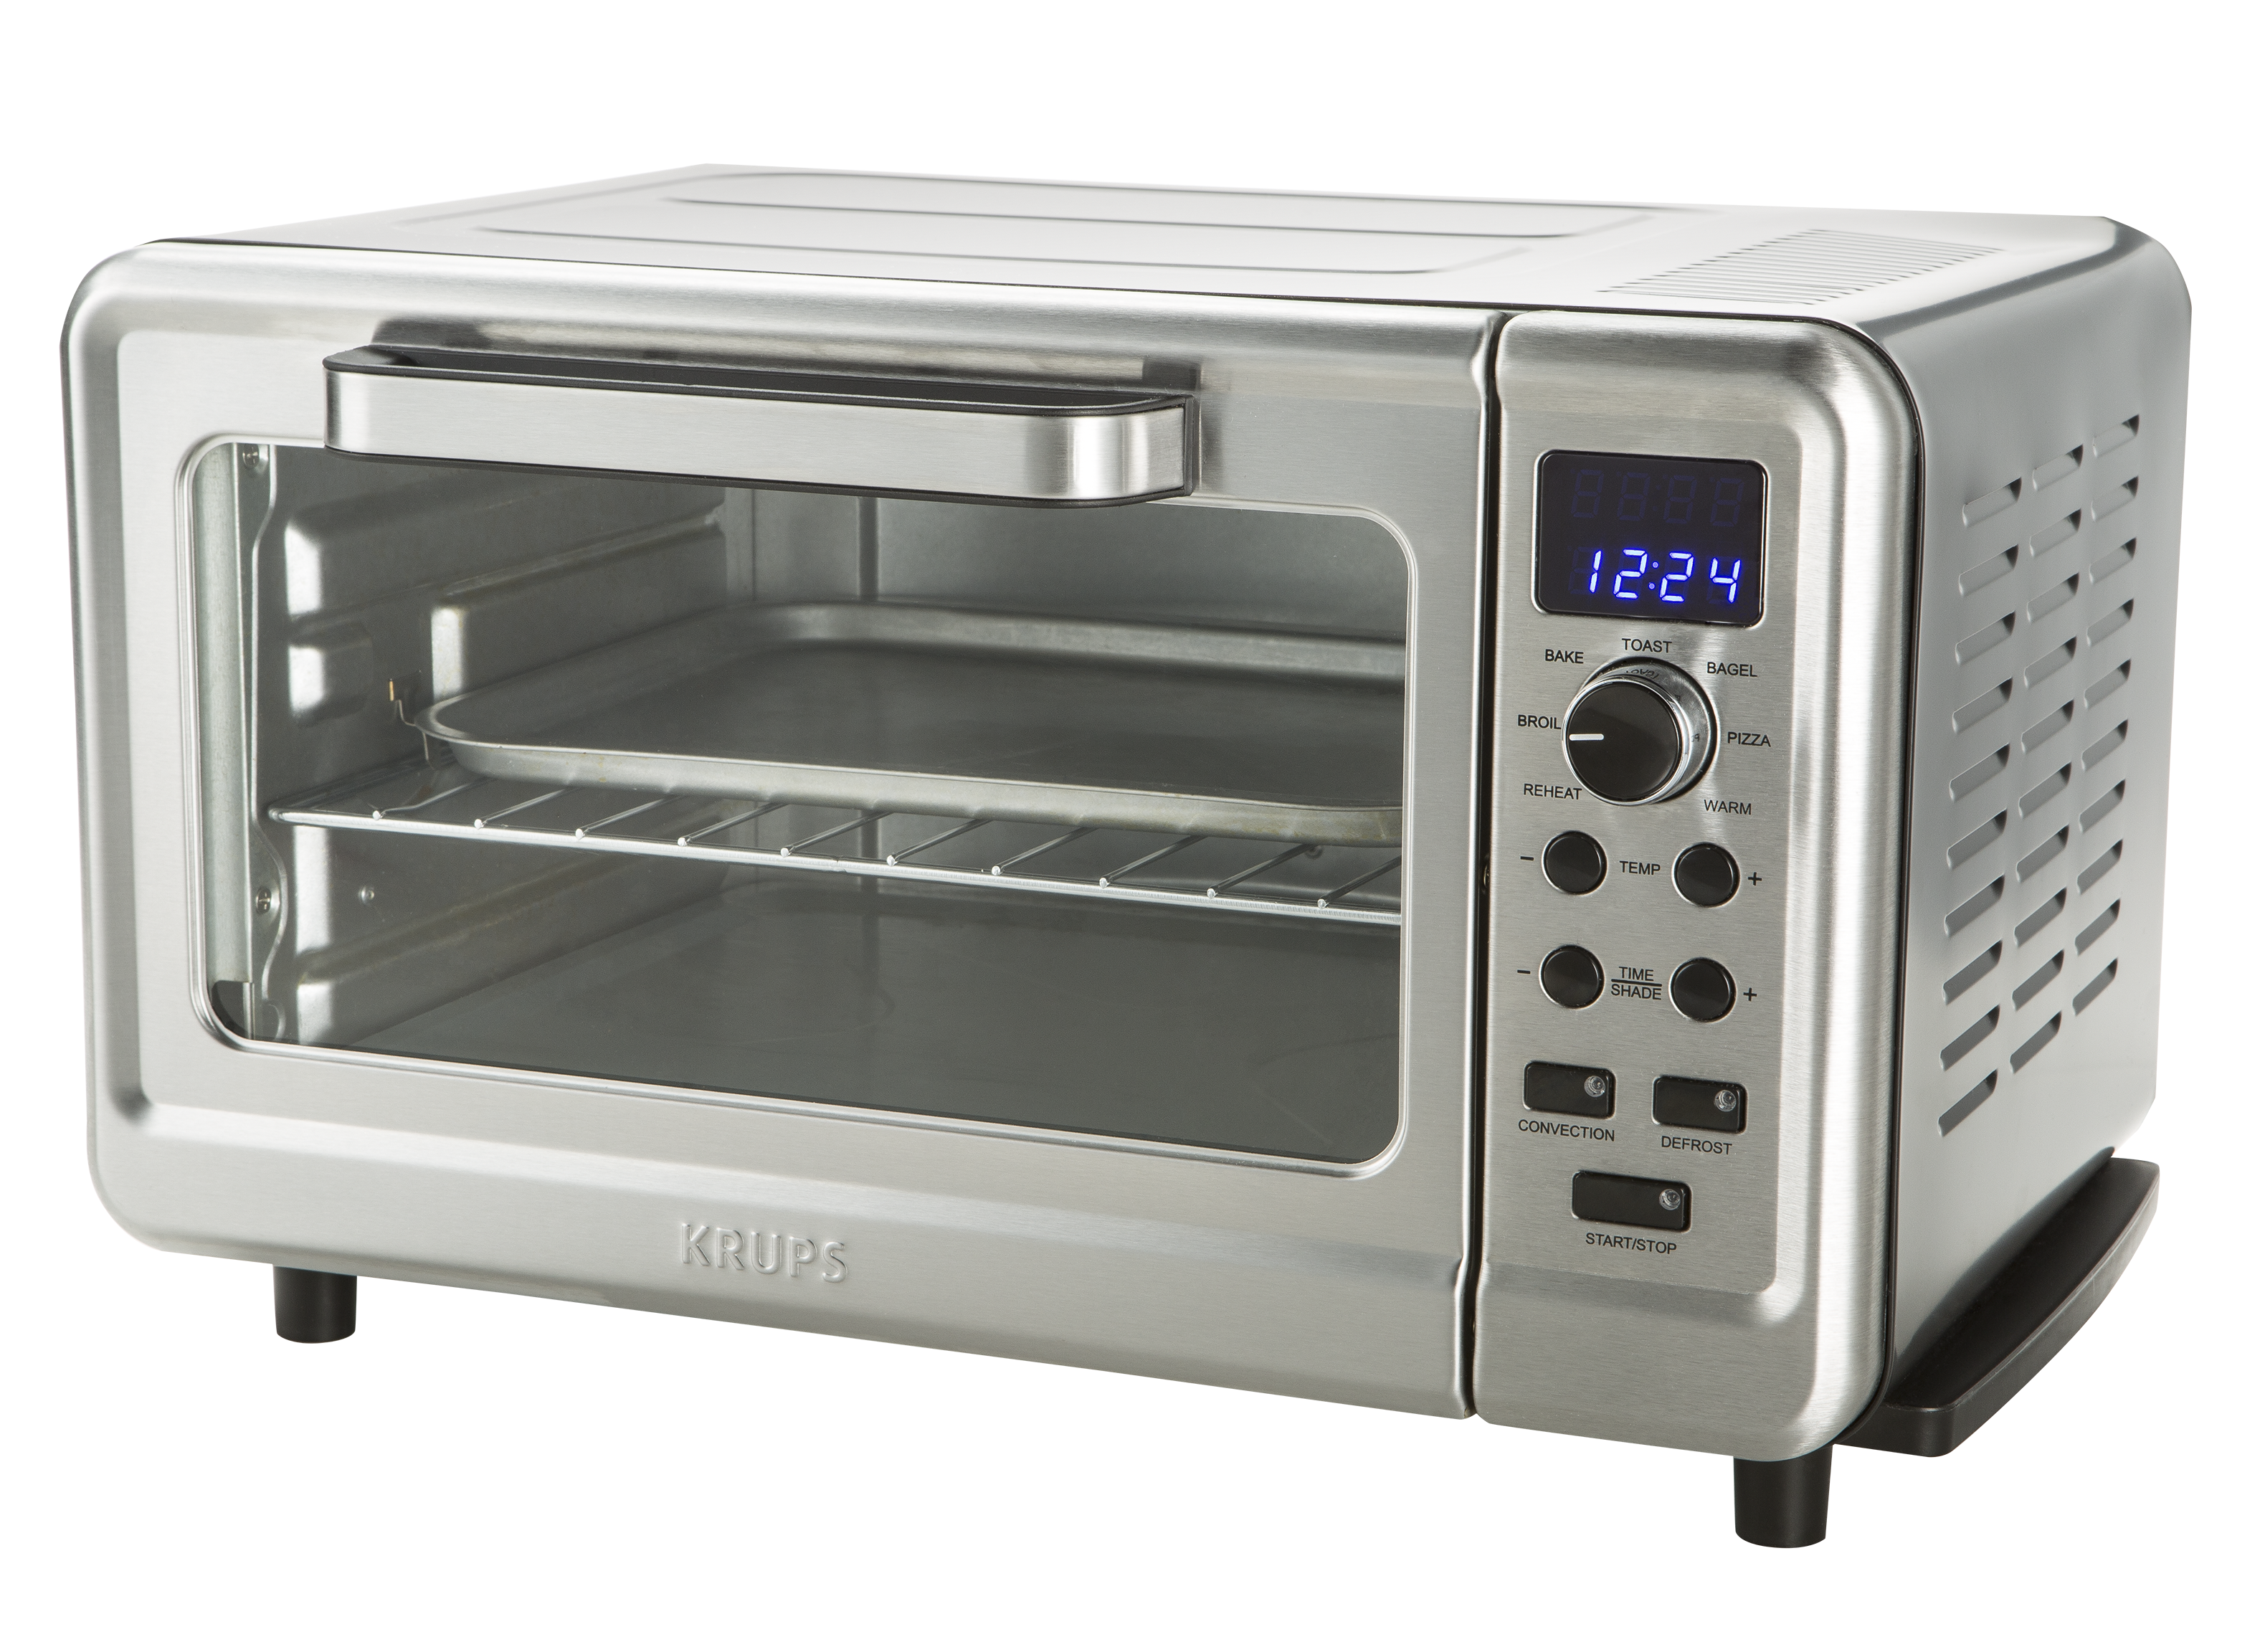 Krups Digital OK505D51 Toaster & Toaster Oven Review - Consumer Reports